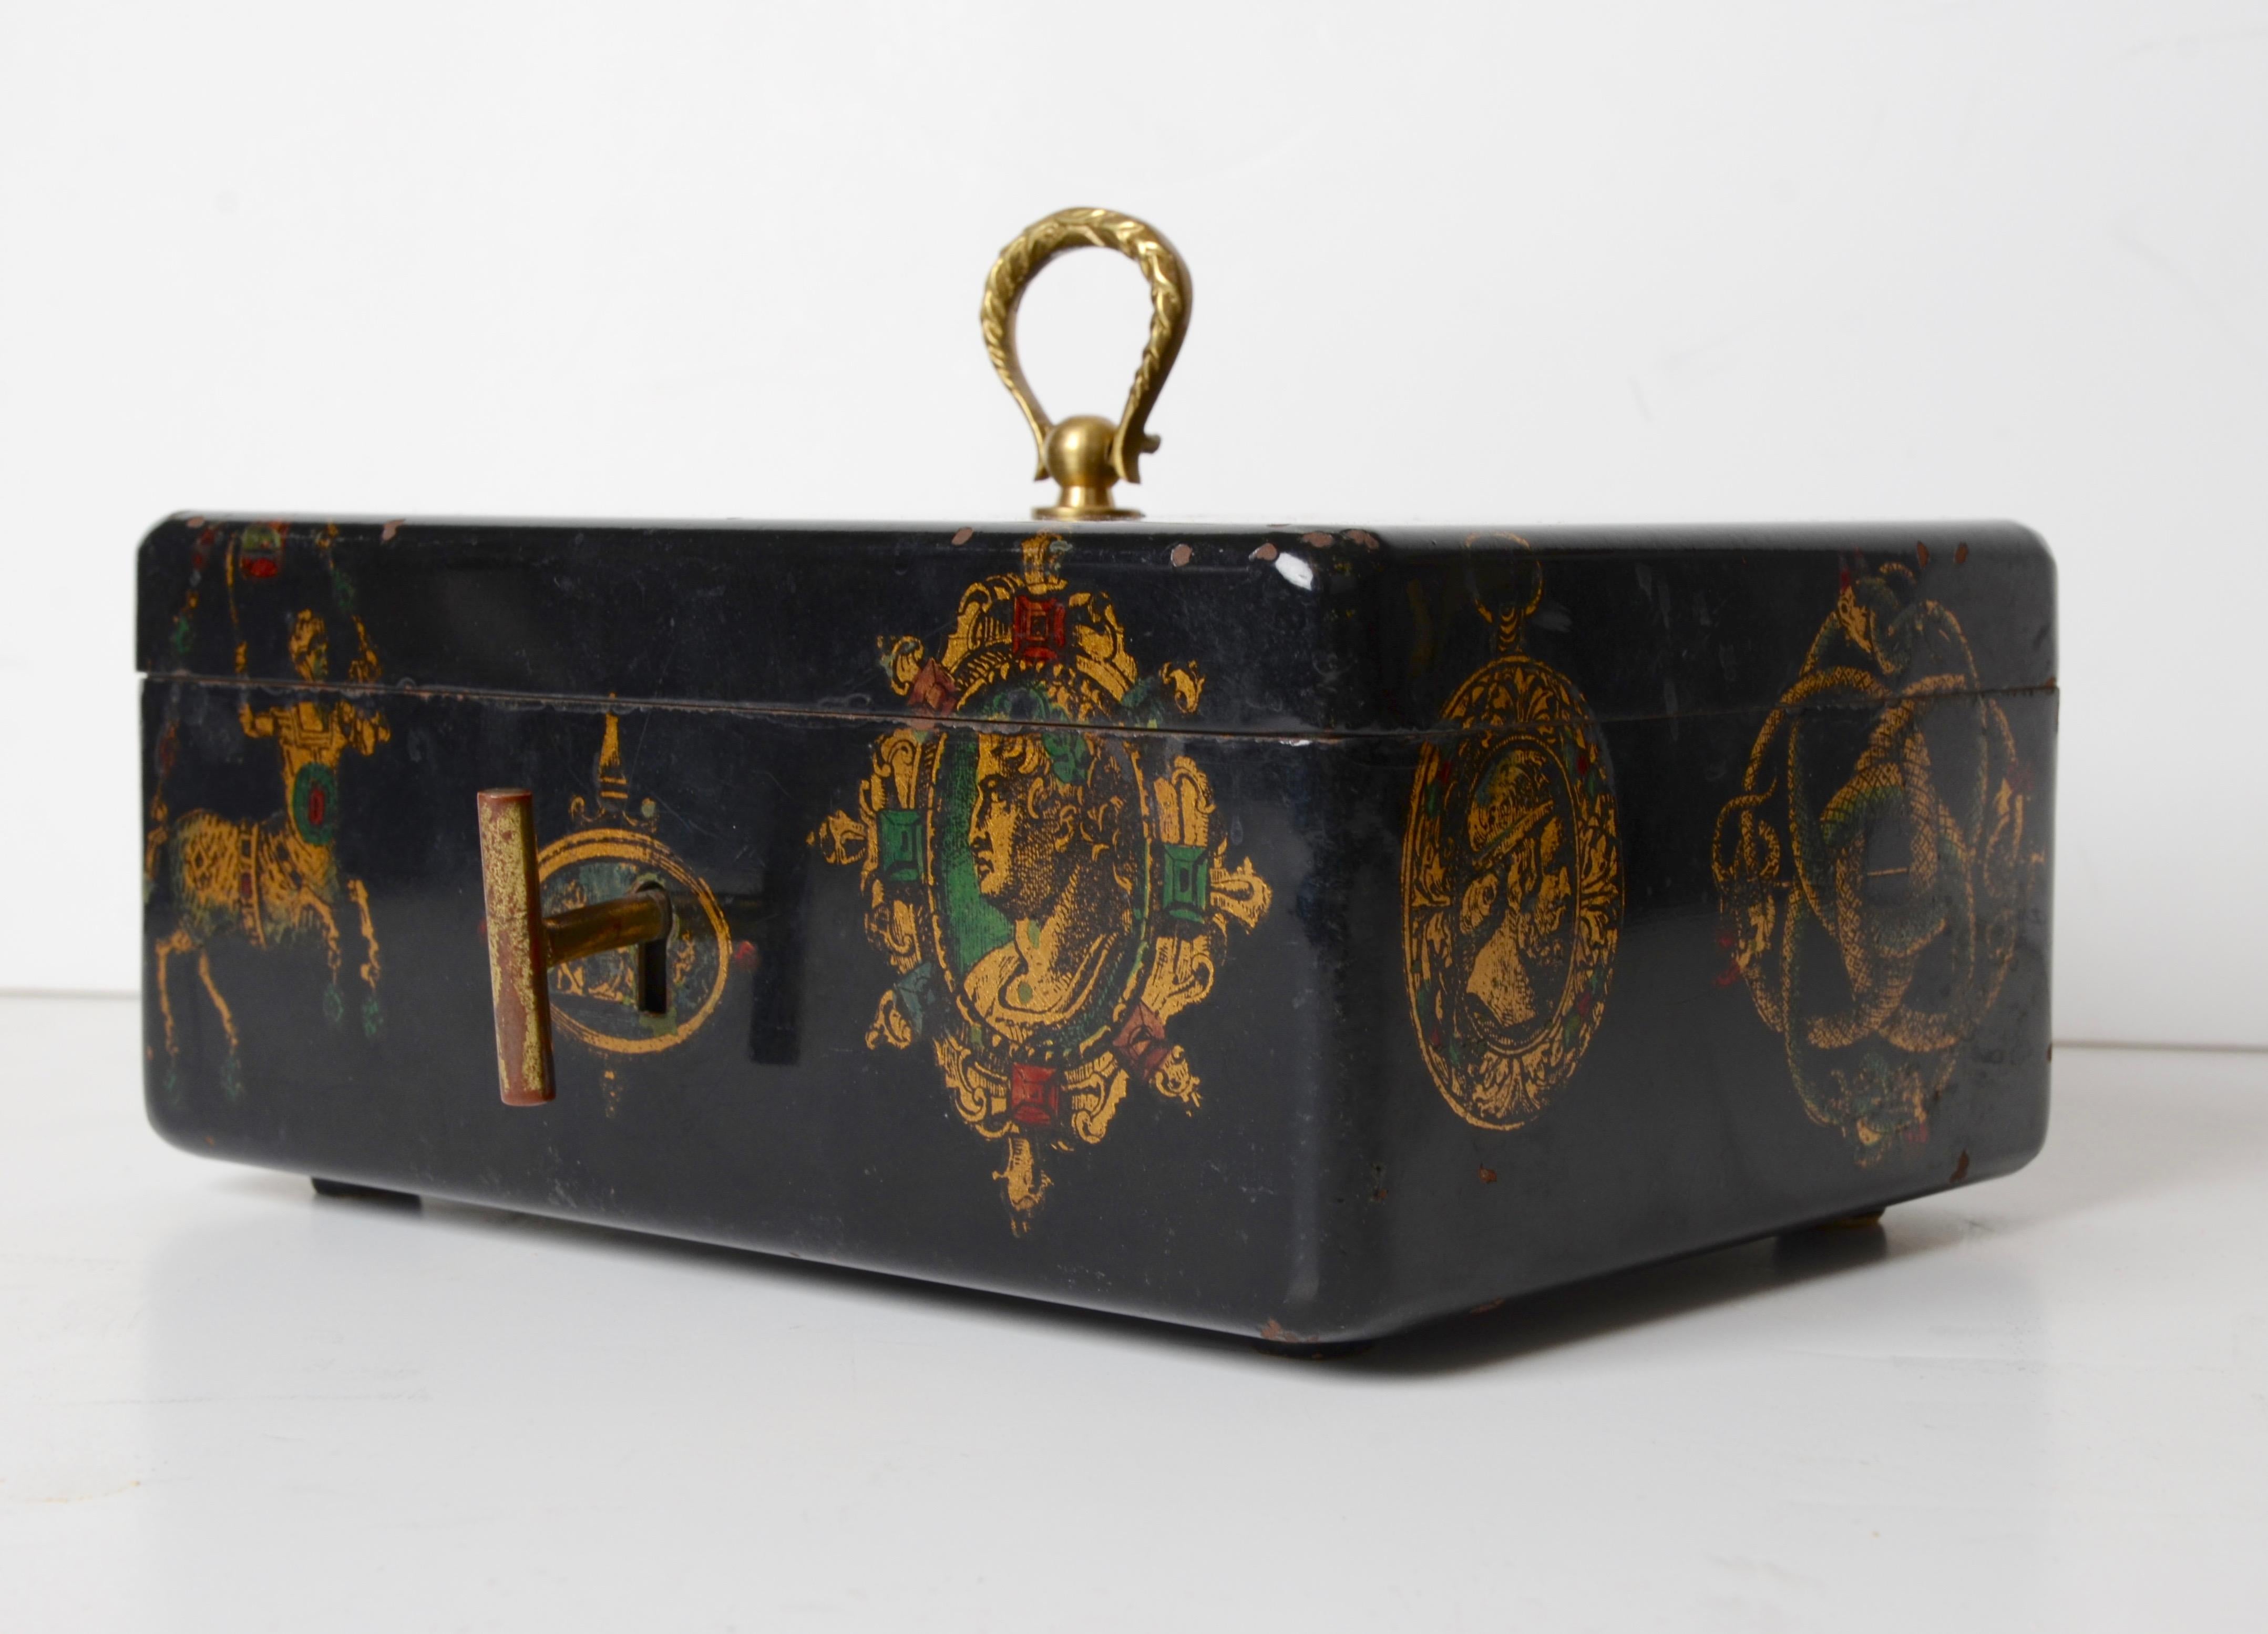 Jewelry box with decor of jewels, by Fornasetti, mid-1900s. Label: Fornasetti Milan. Made in Italy.

Lacquered metal. Original brass key.